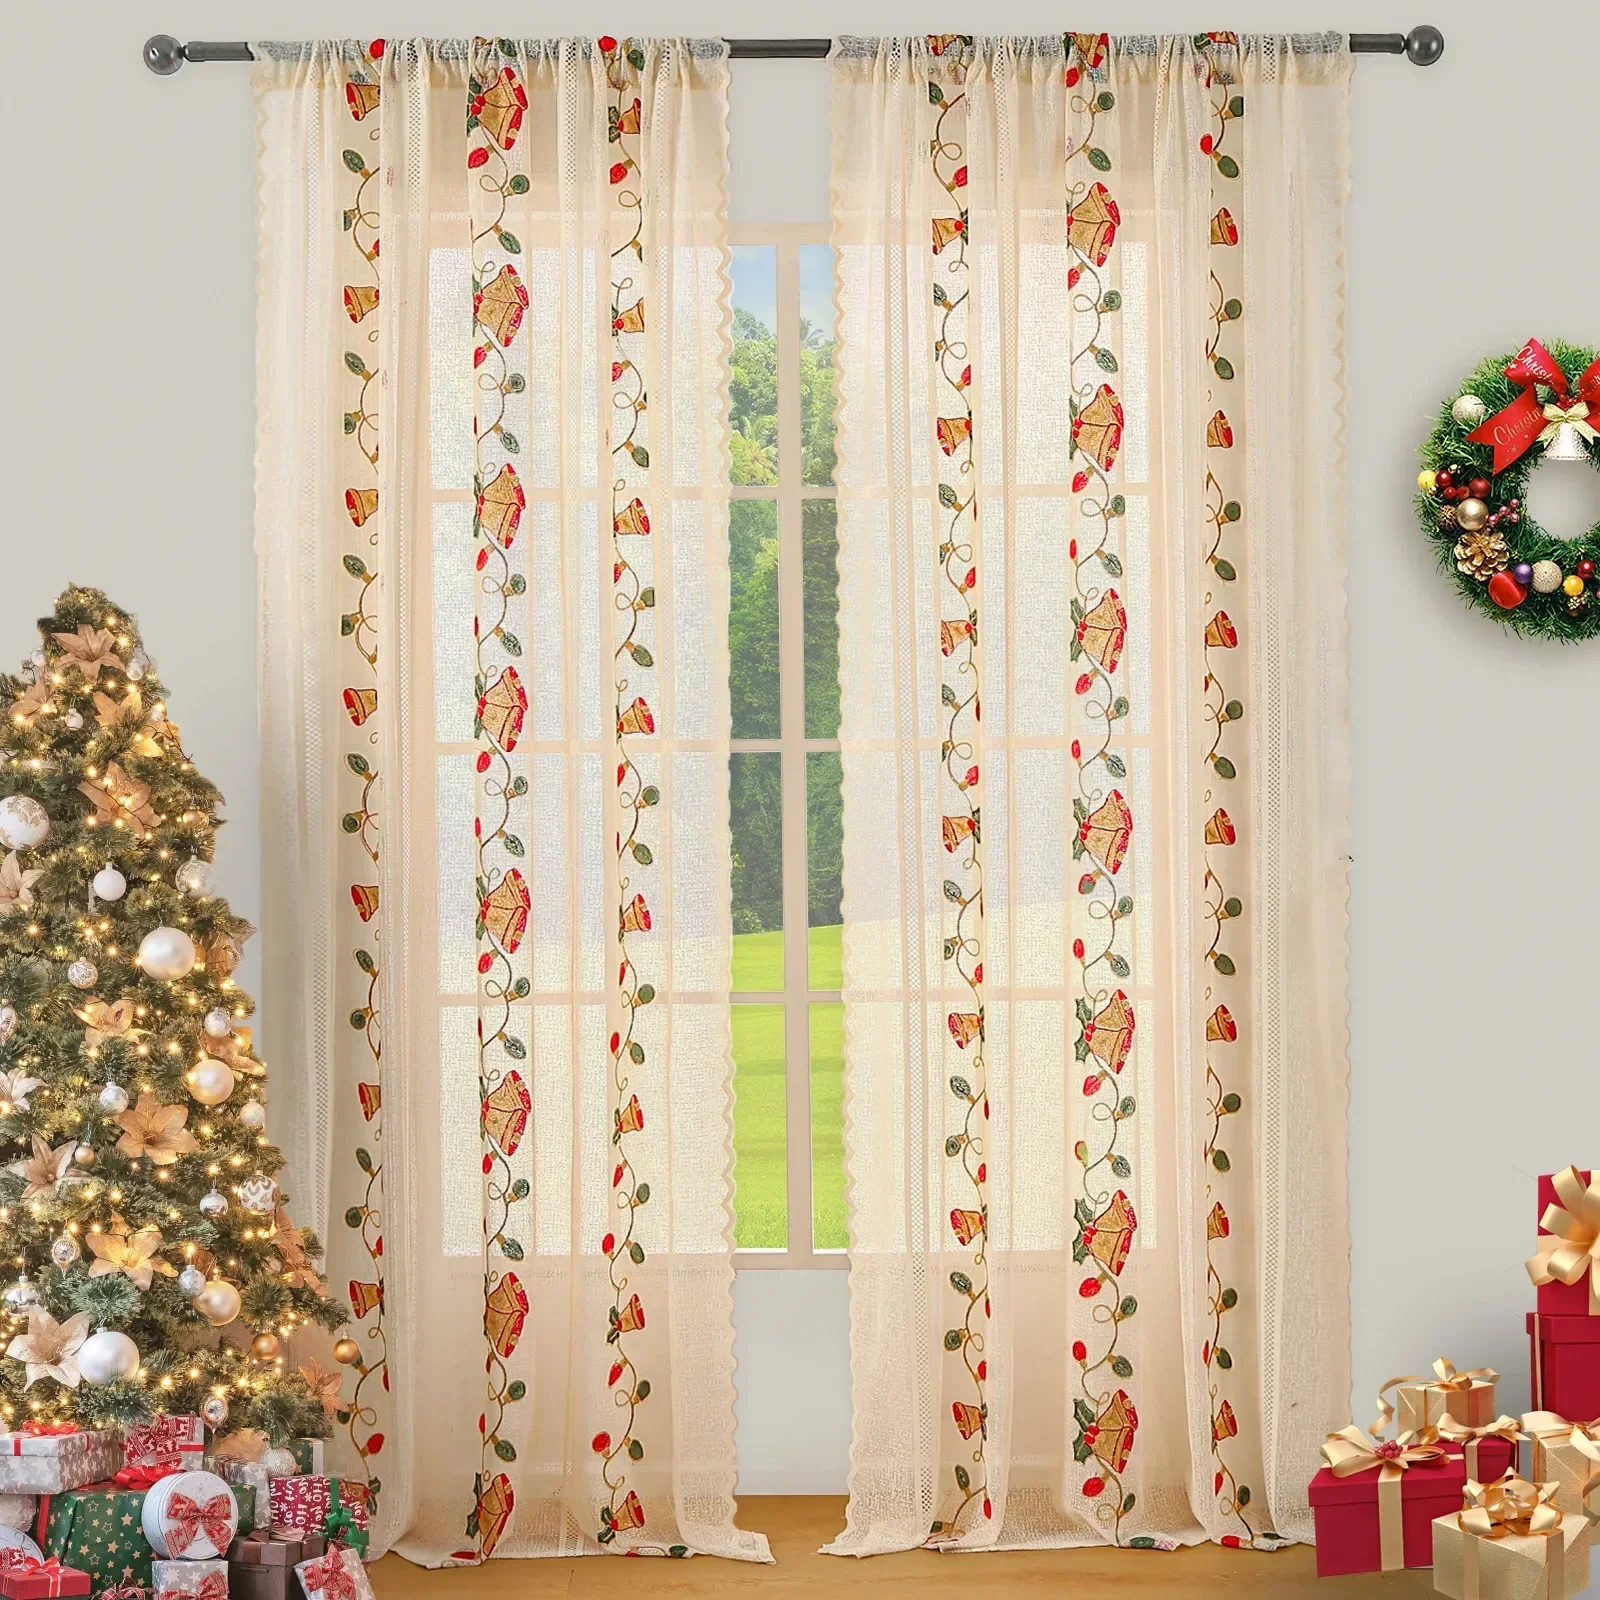 

American Christmas Curtain Bells Embroidered Lace Living Room Bedroom Kitchen Rectangular Beautify Decorated Door Curtain